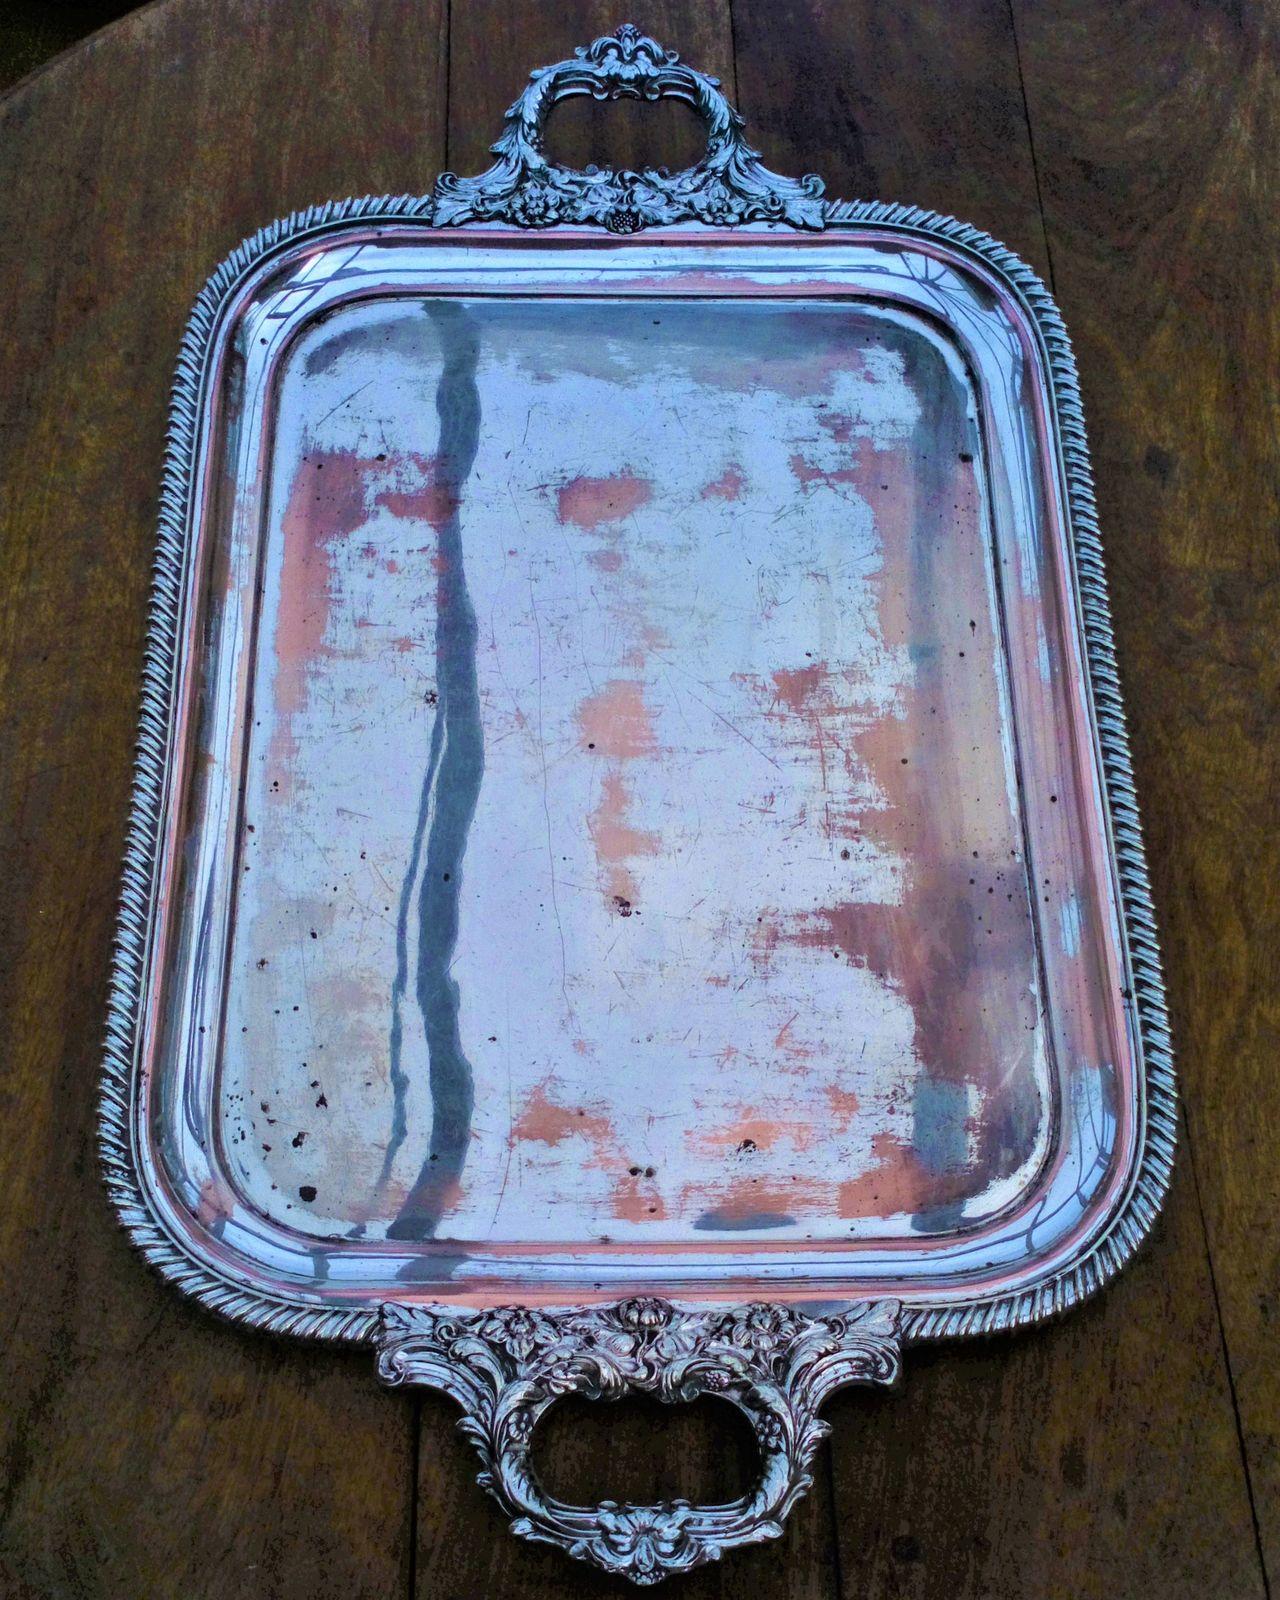 Antique Heavy Quality Silver Plate on Copper Butler's Tray 29 inches long 17 inches wide Victorian 1870 weighs 5 kg